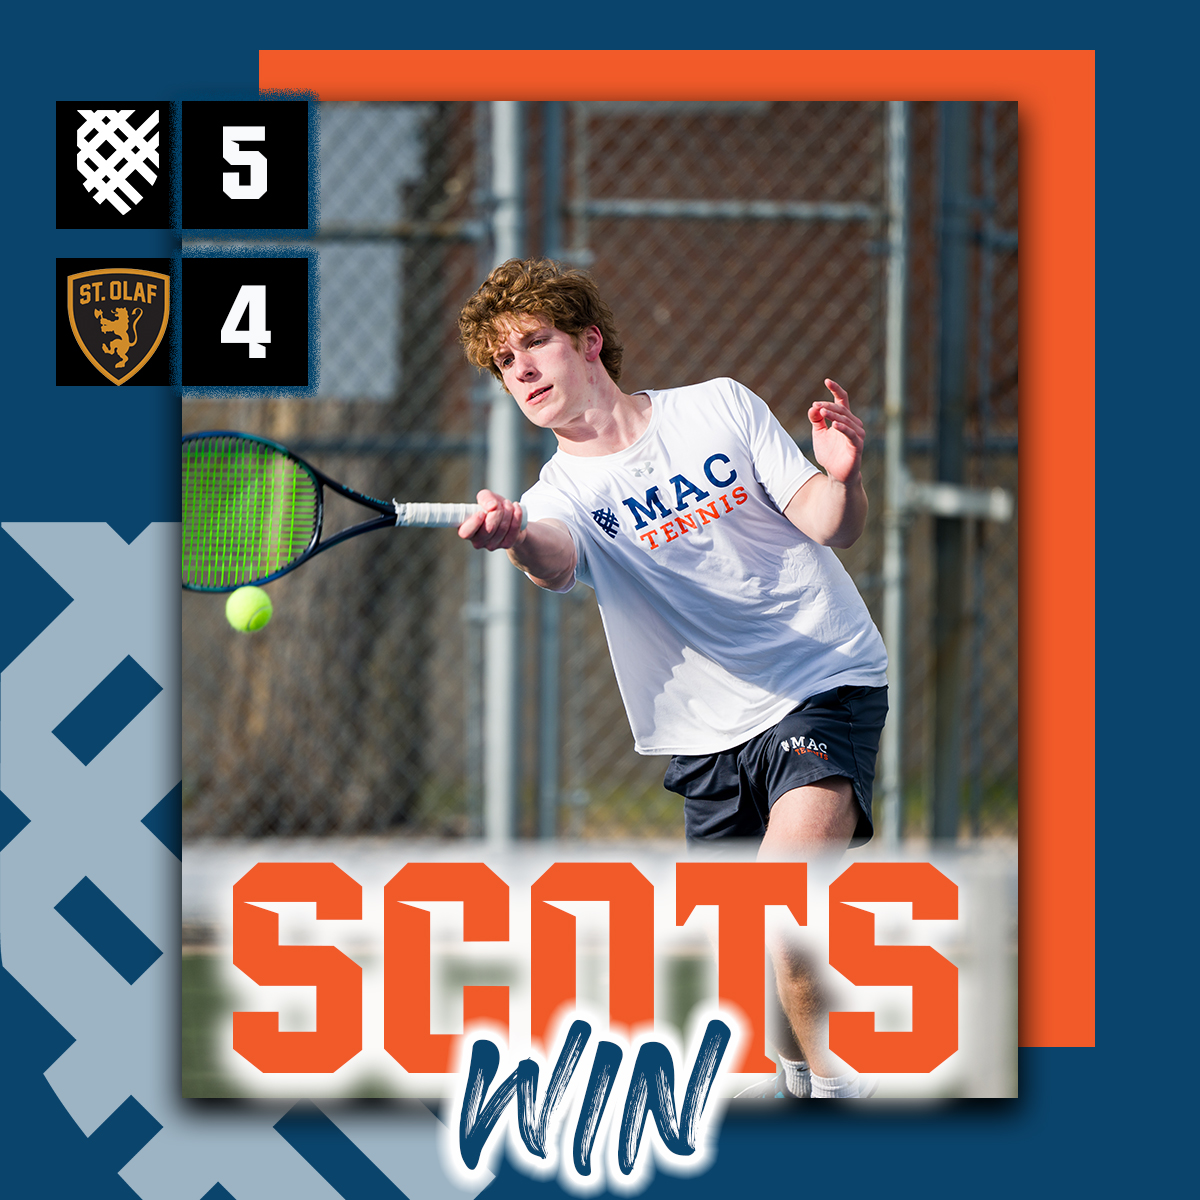 SCOTS WIN! Playoffs secured with defeat of Oles! #GoScots #heymac